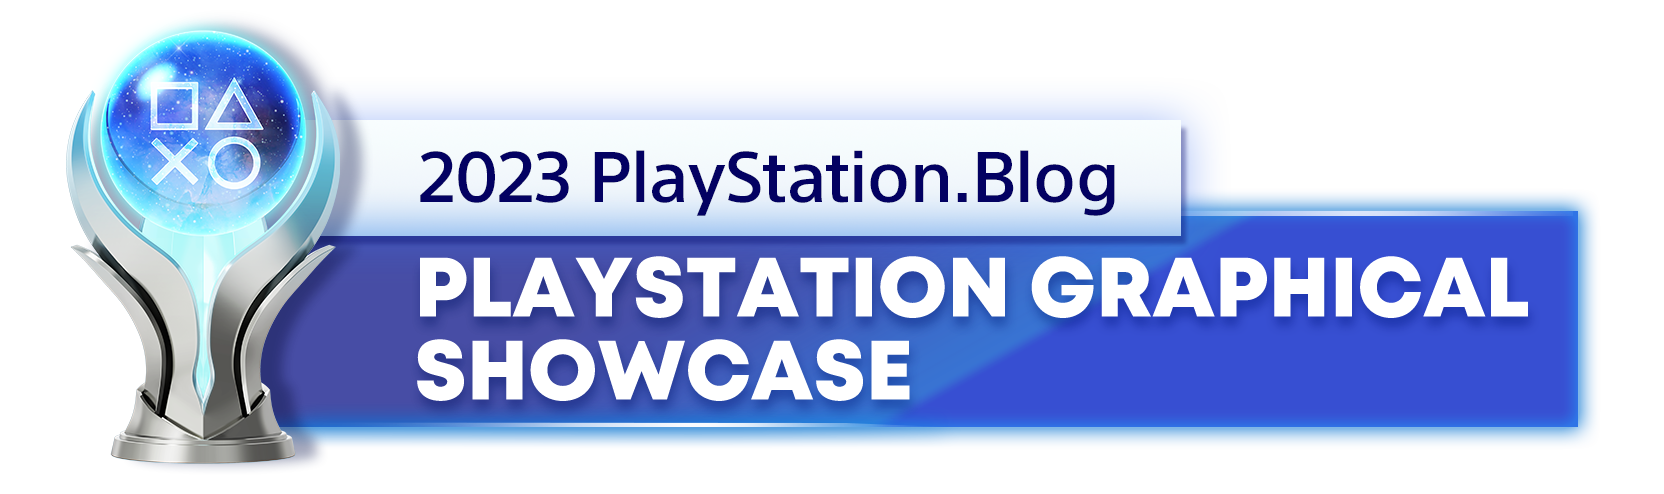  "Platinum Trophy for the 2023 PlayStation Blog PlayStation Best Graphical Showcase Winner"